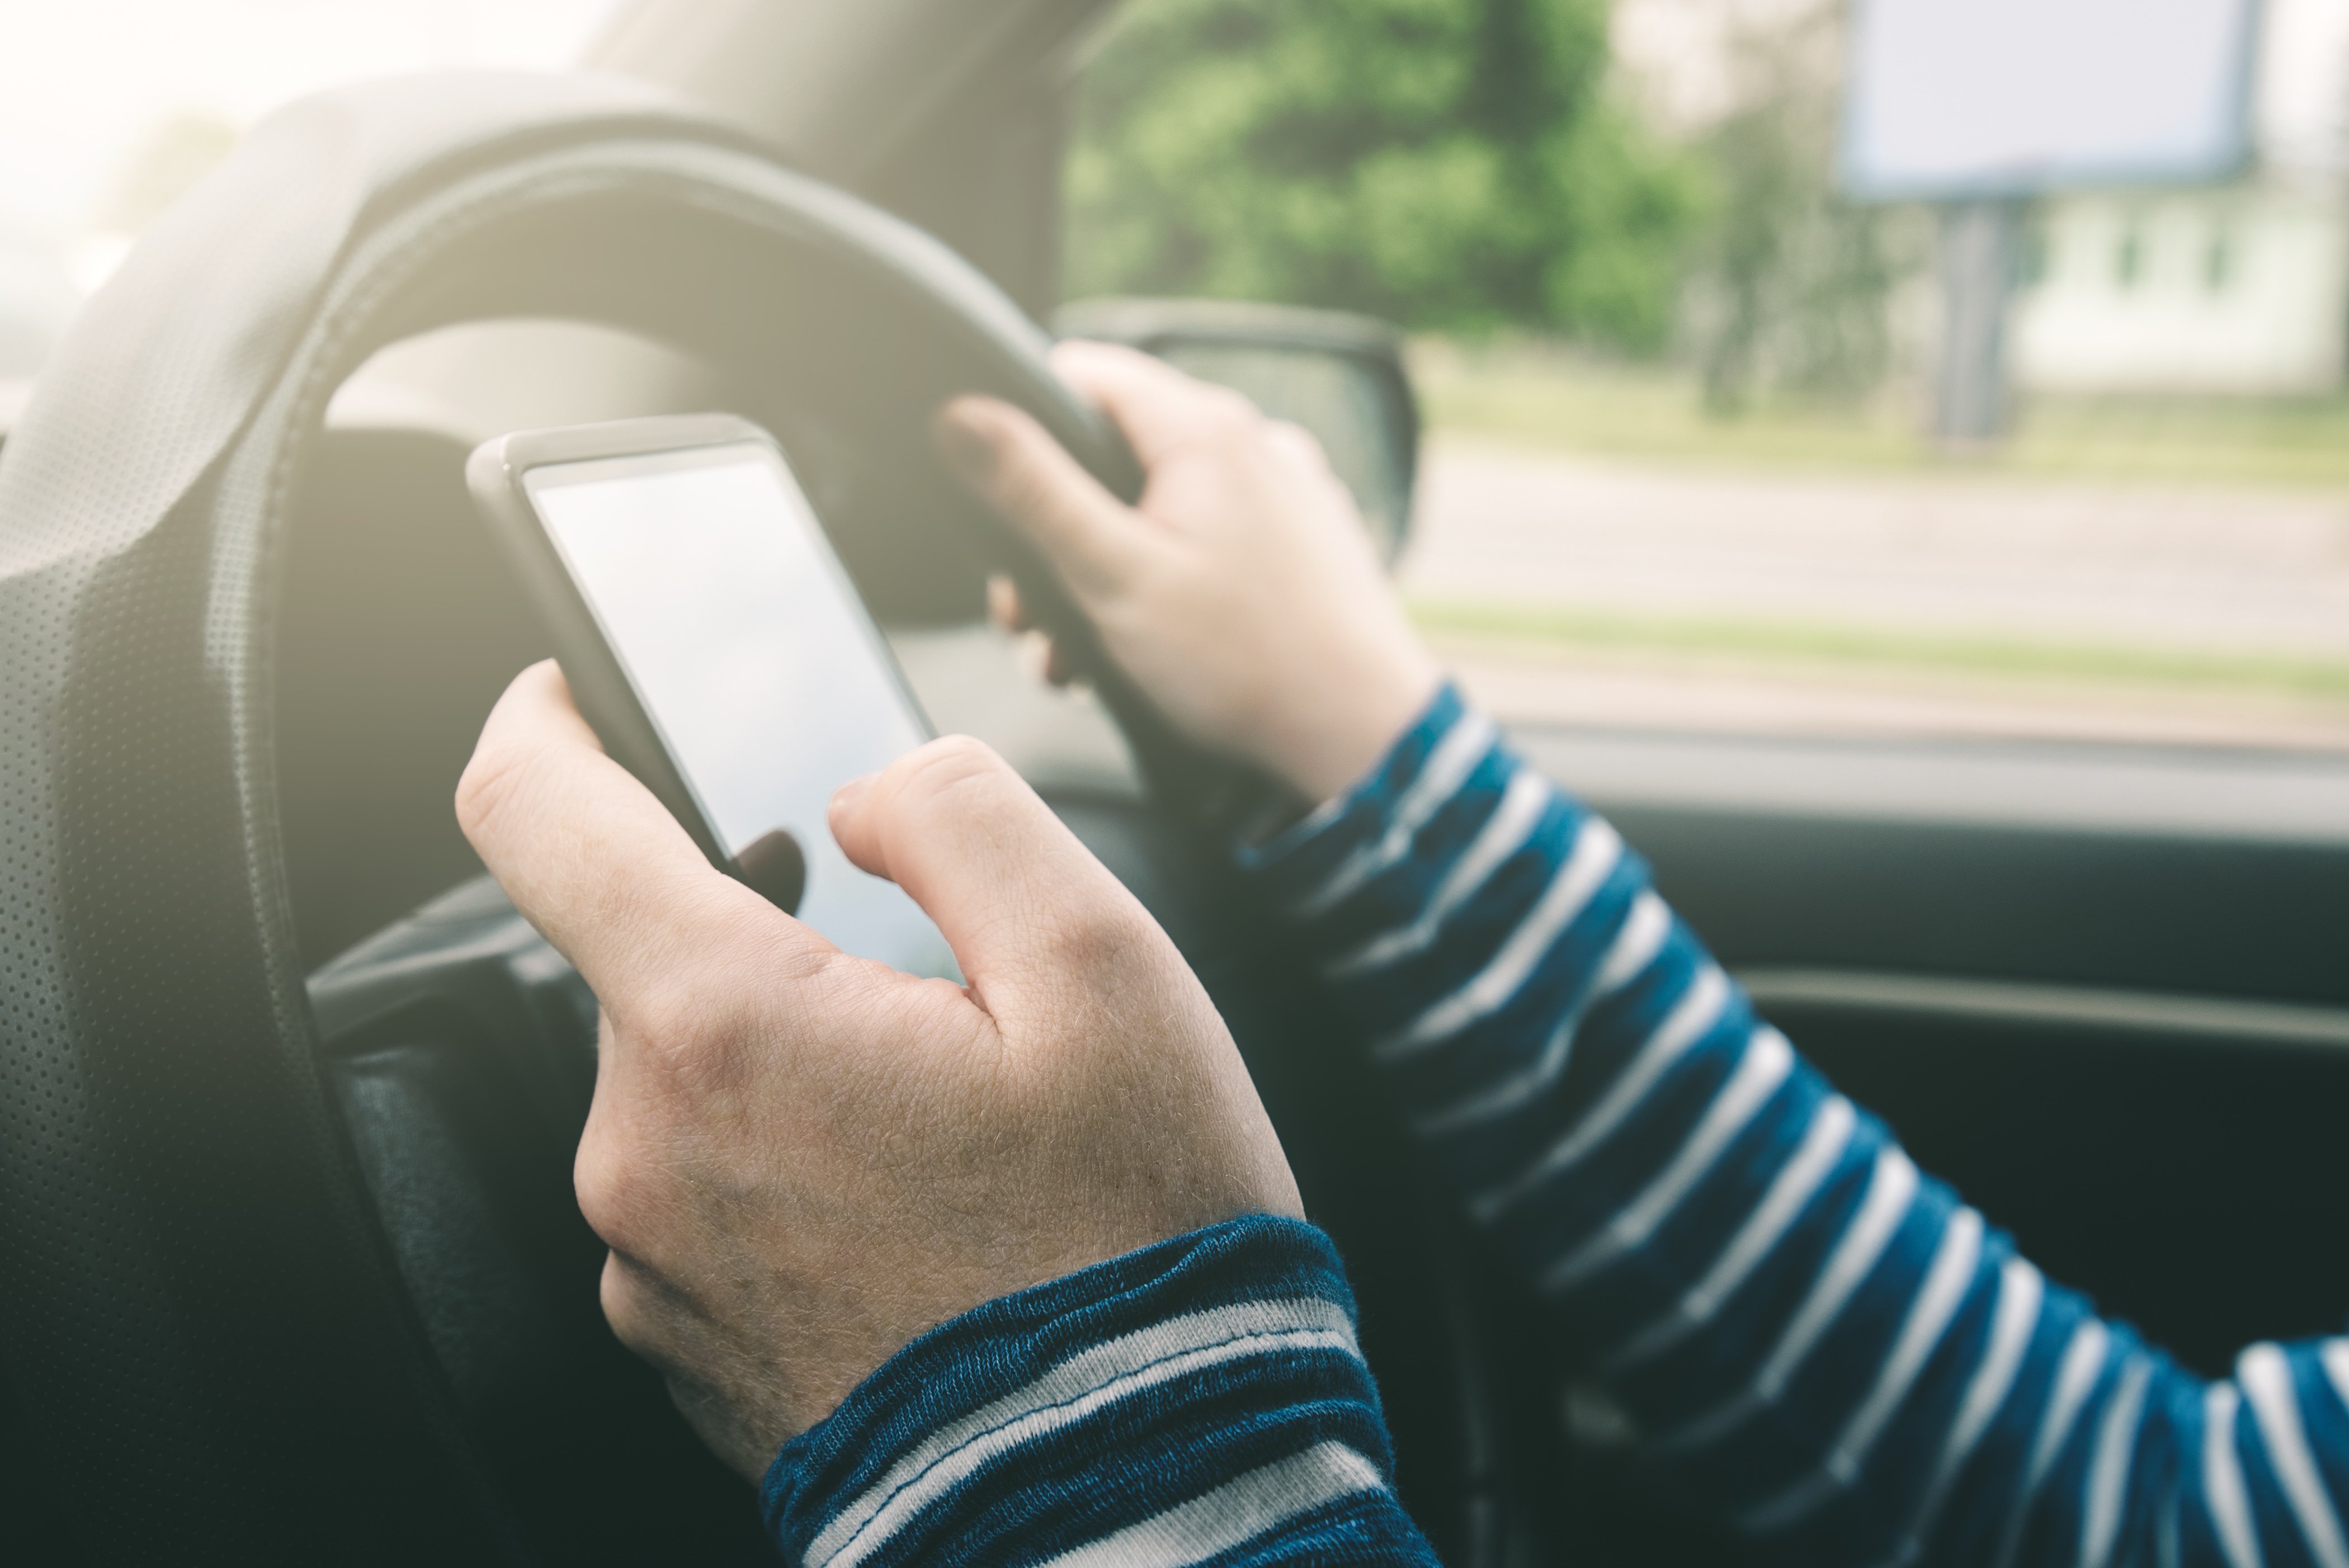 Drivers support harsher punishments for mobile use